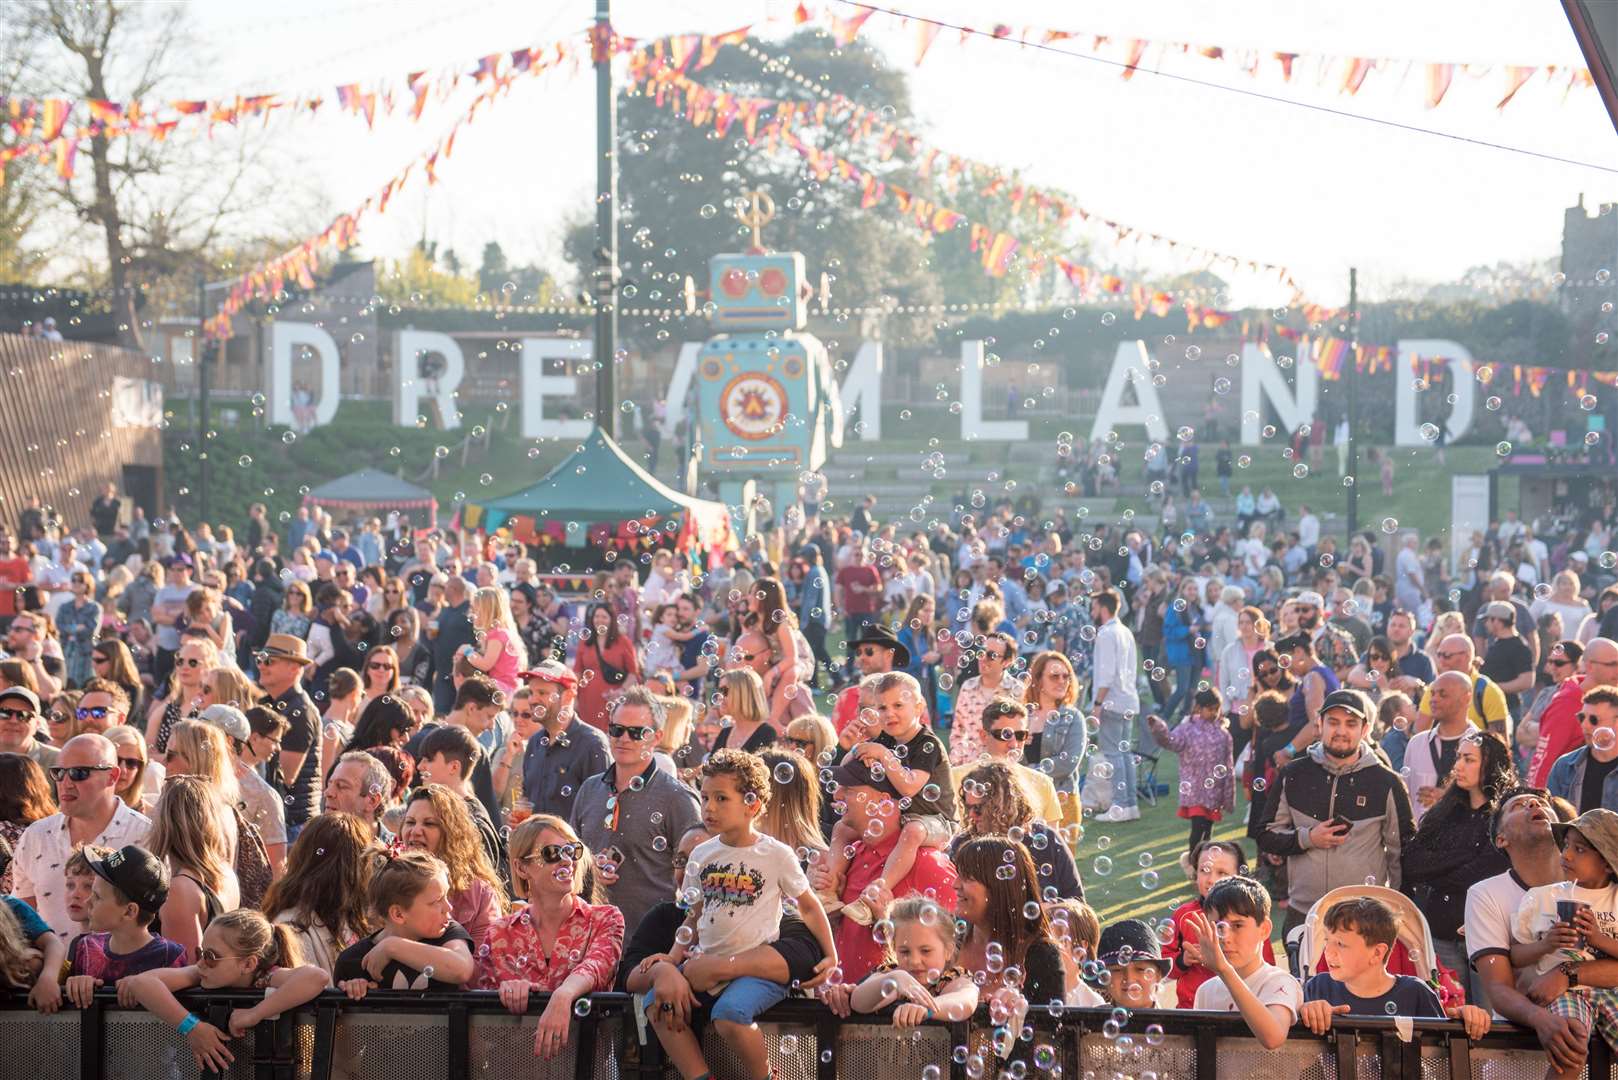 Camp Bestival takeover at Dreamland